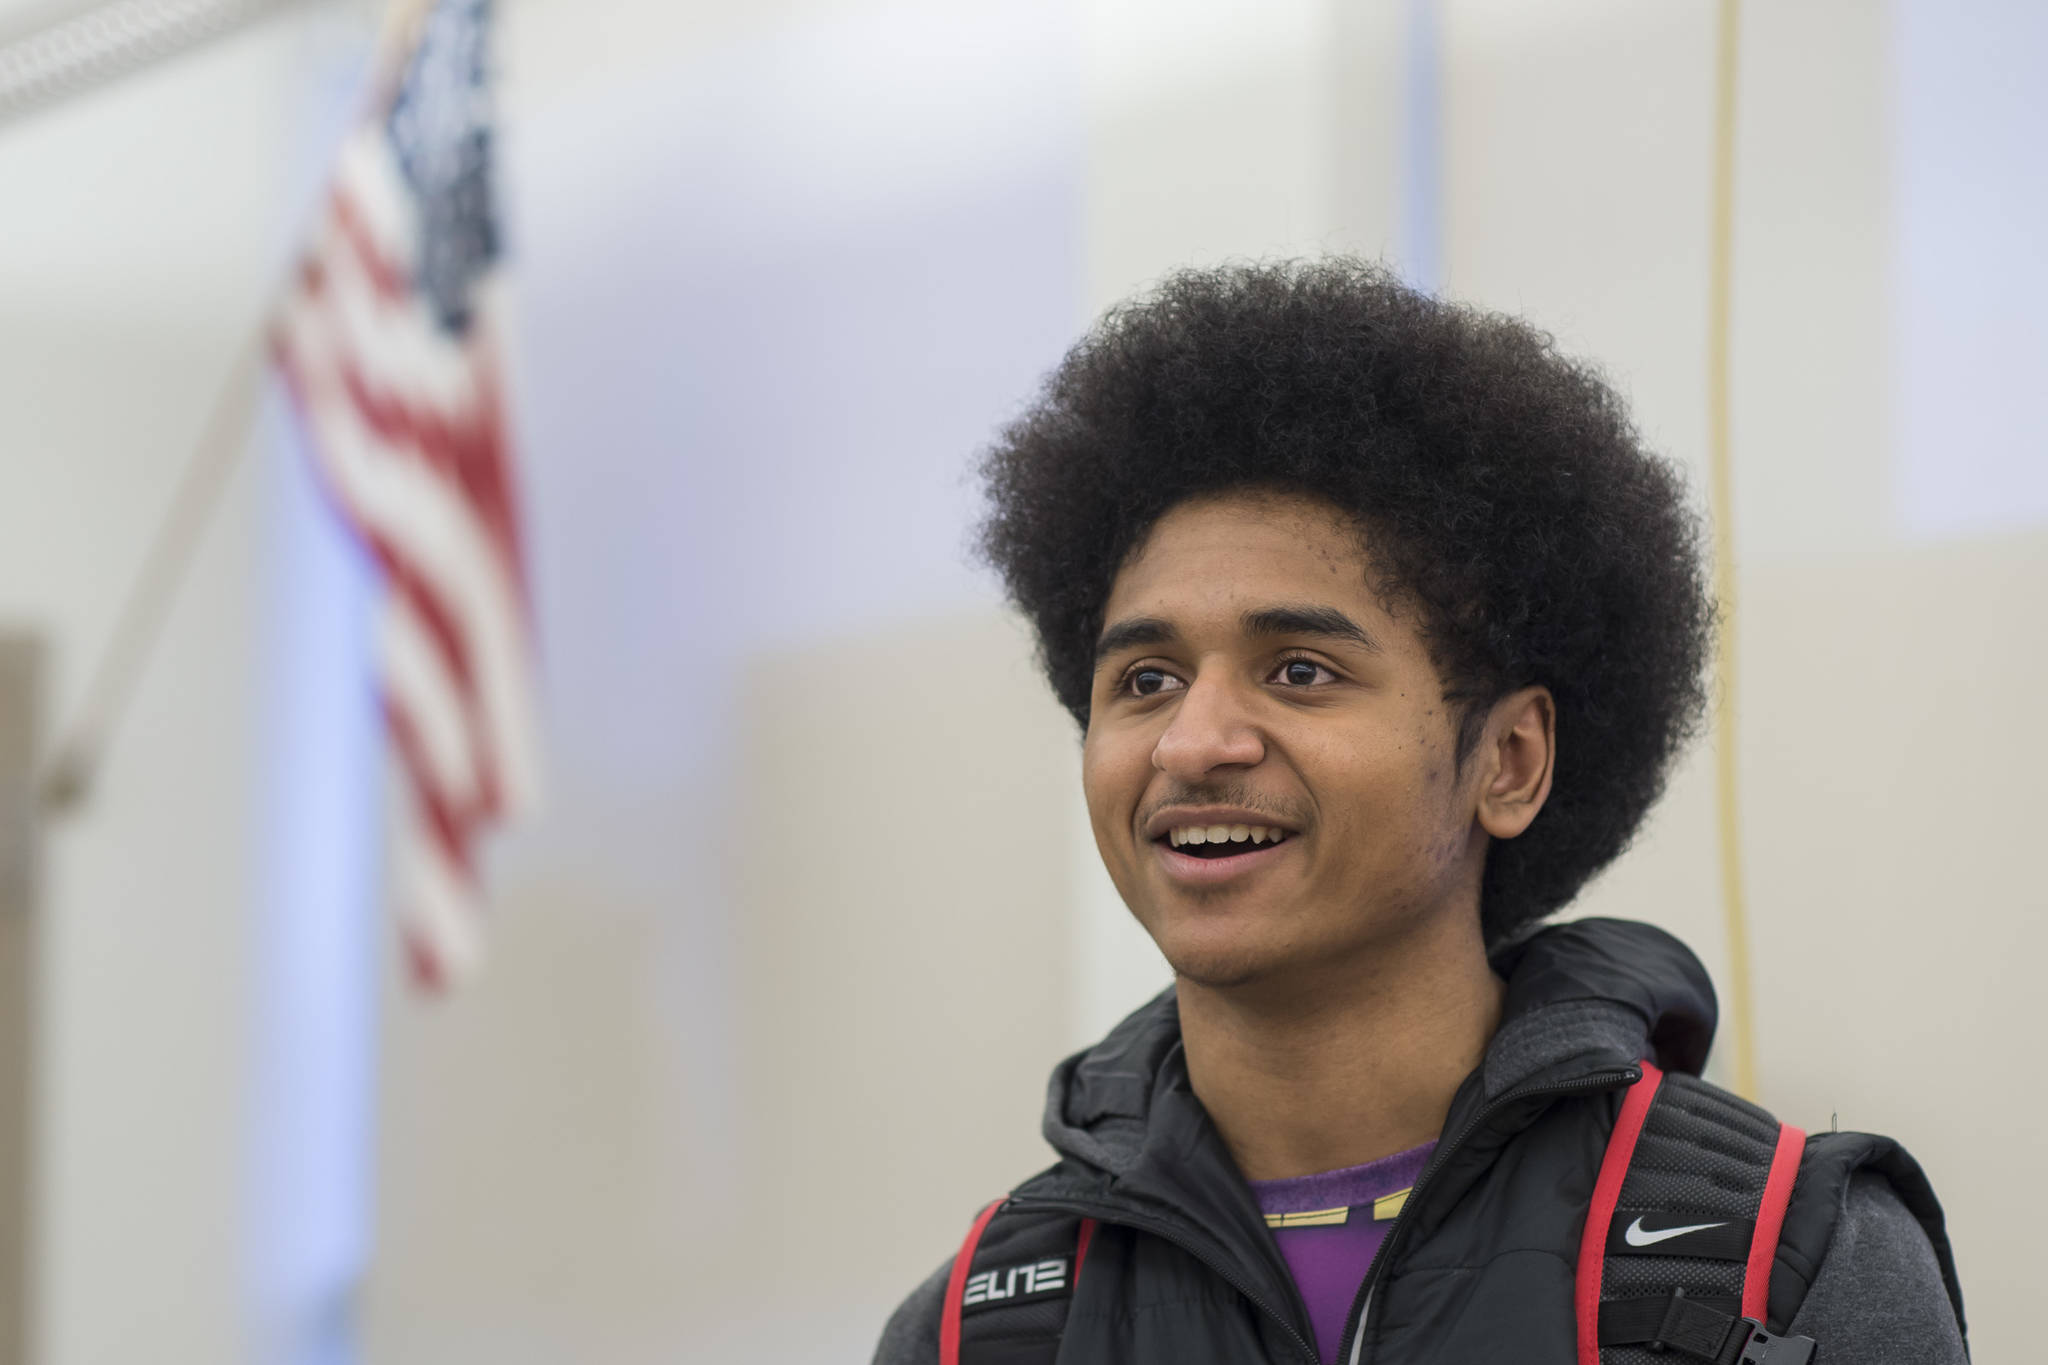 Senior Arias Hoyle is one of a number of Juneau-Douglas High School students looking to add “Yadaa.at Kalé,” the Tlingit name for Mount Juneau, to the high school’s name. (Michael Penn | Juneau Empire)